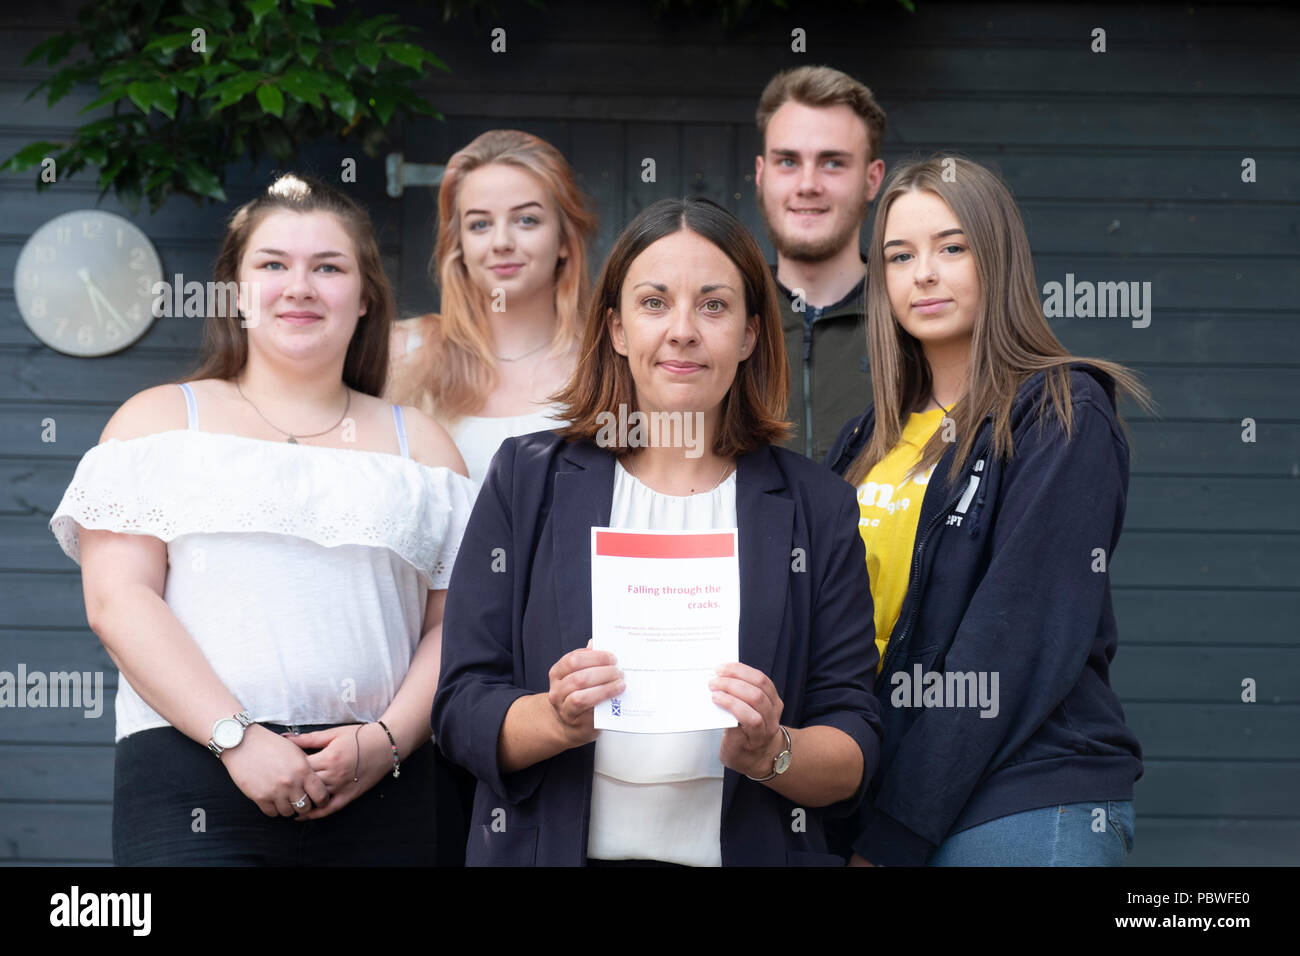 Edinburgh, Scotland, UK; 30 July , 2018. Lothian Labour MSP Kezia Dugdale launches major new report, ÒFalling through the cracksÓ, which examines the life chances of care-experienced young people in Scotland at the 6VT, Edinburgh City Youth CafŽ in Edinburgh today. Pictured L to R; Roseanna Campbell, 19, Katherine Grindley, 16, Kezia Dugdale MSP, Darren Telford, 17, Sarah-Louise Kelegher, 16. Credit: Iain Masterton/Alamy Live News Stock Photo